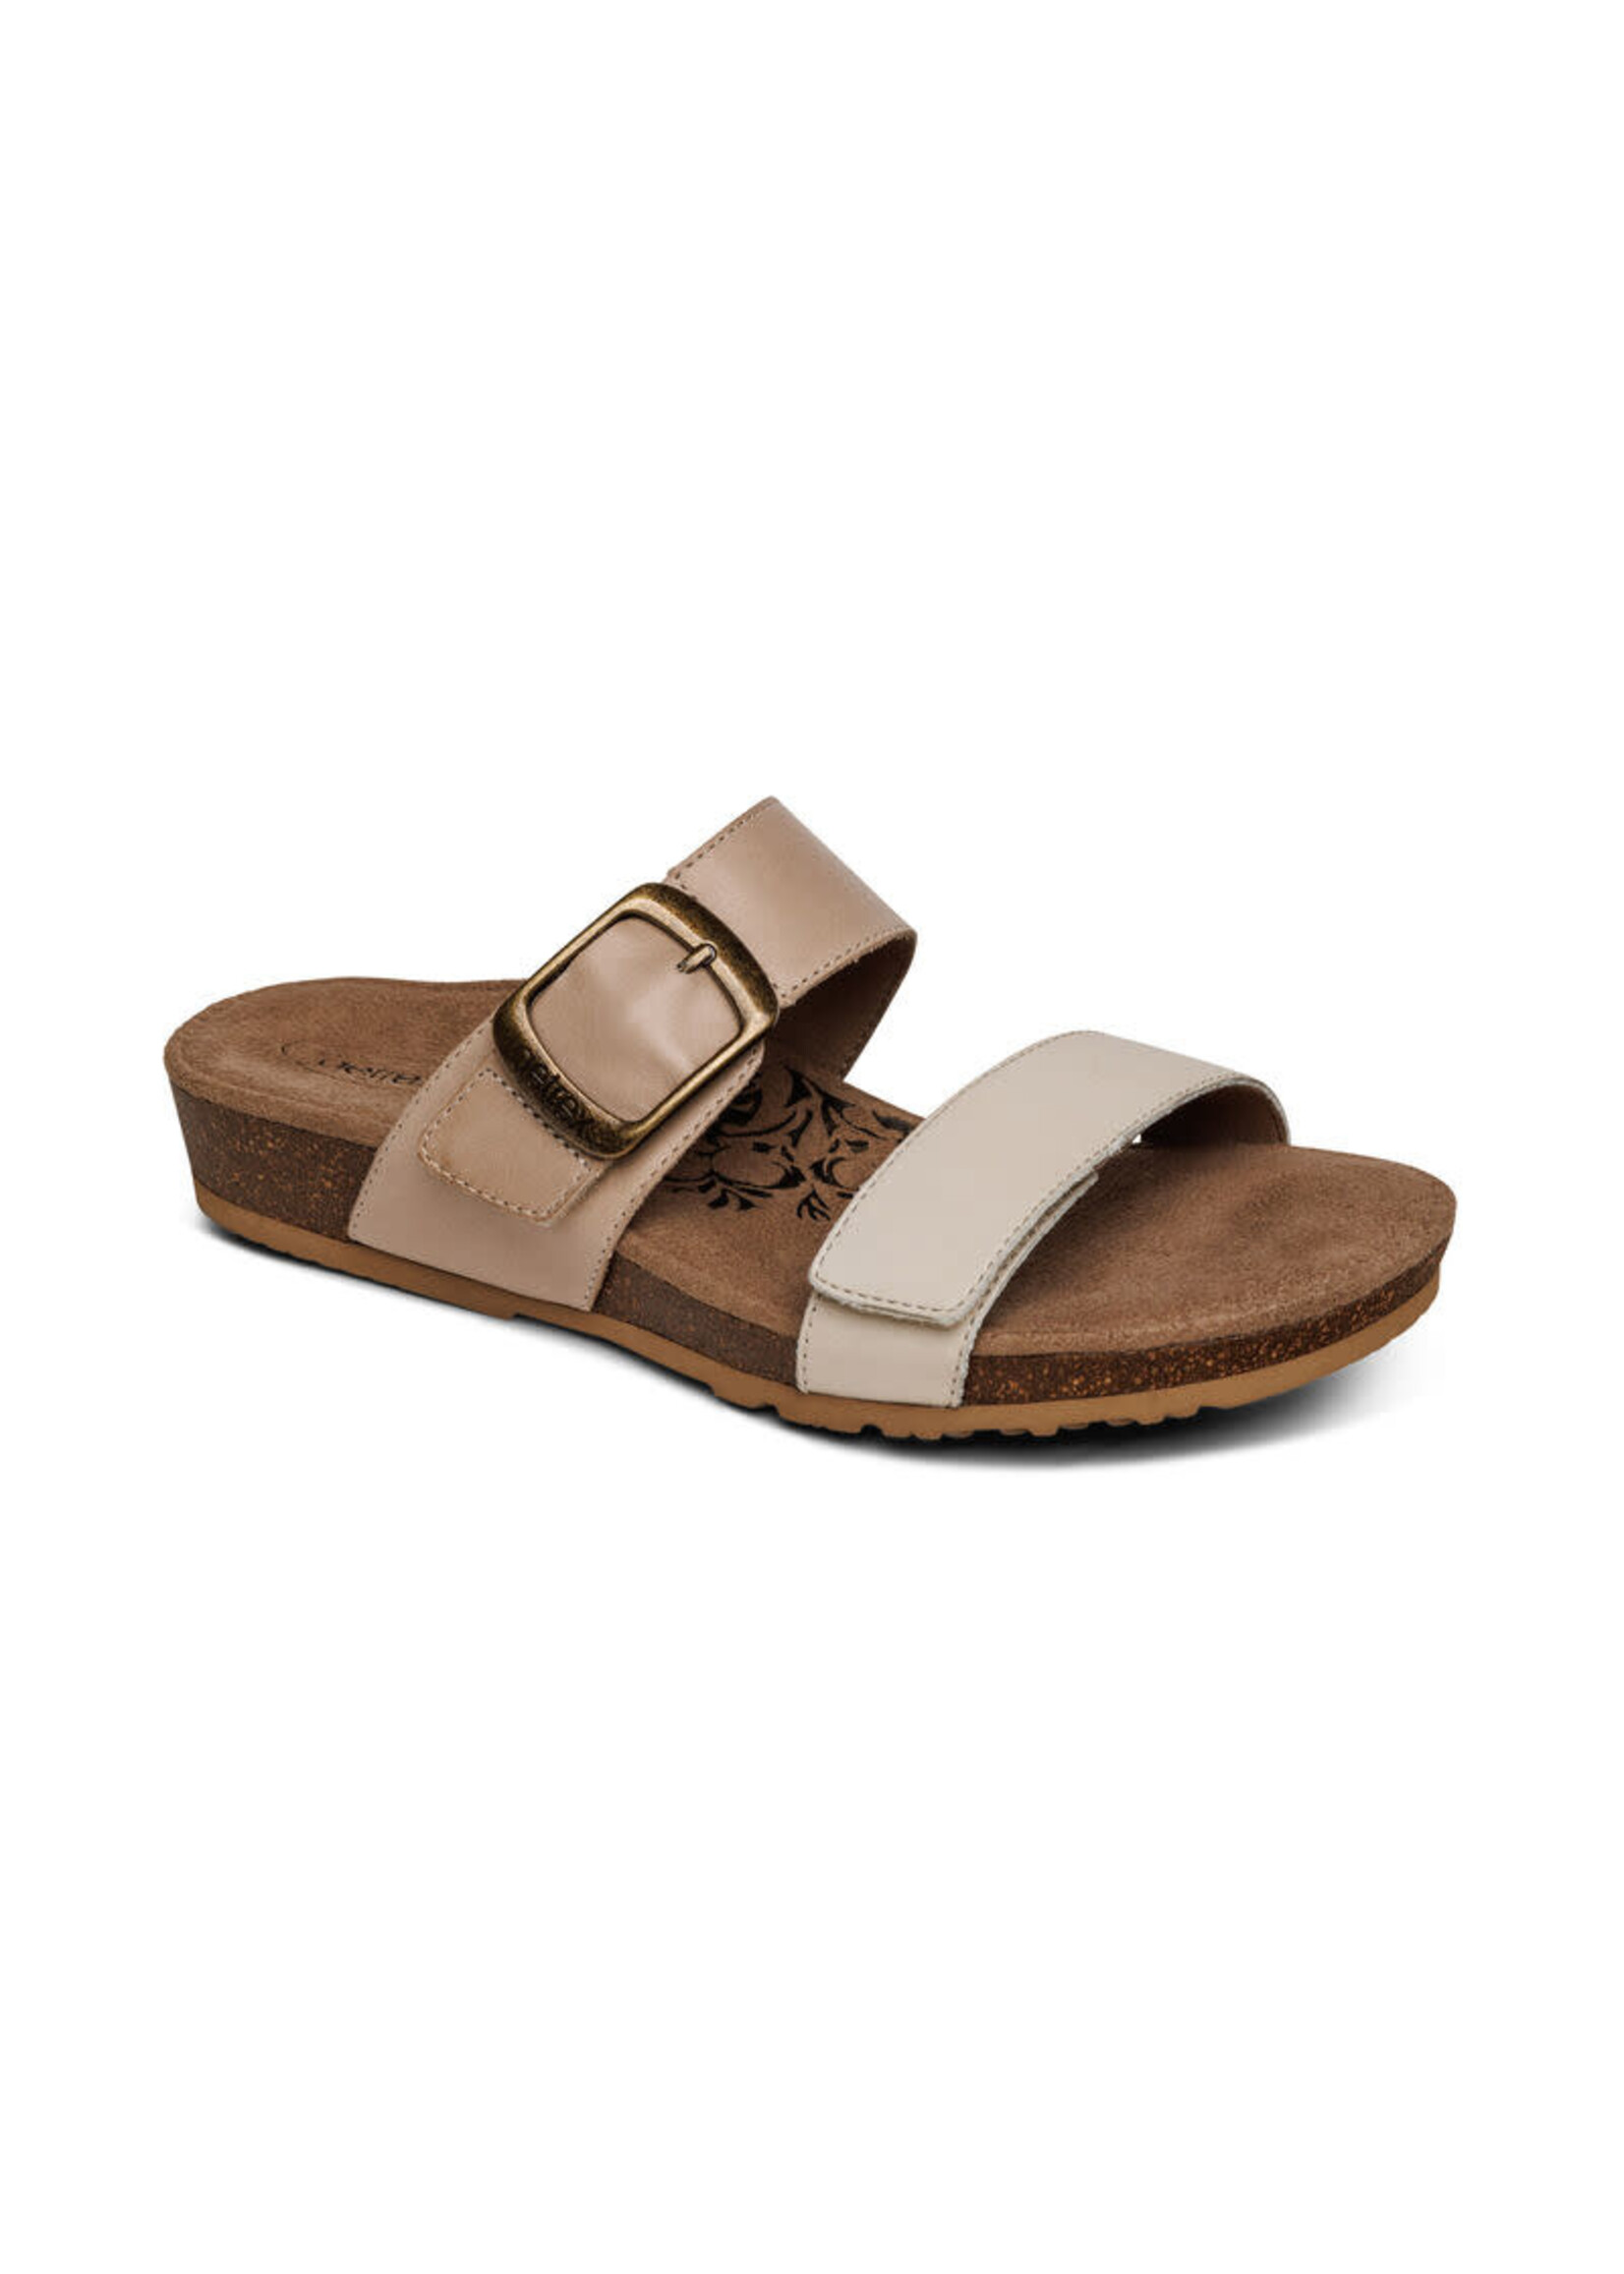 Aetrex Daisy Ivory Adjustable Sandals by Aetrex